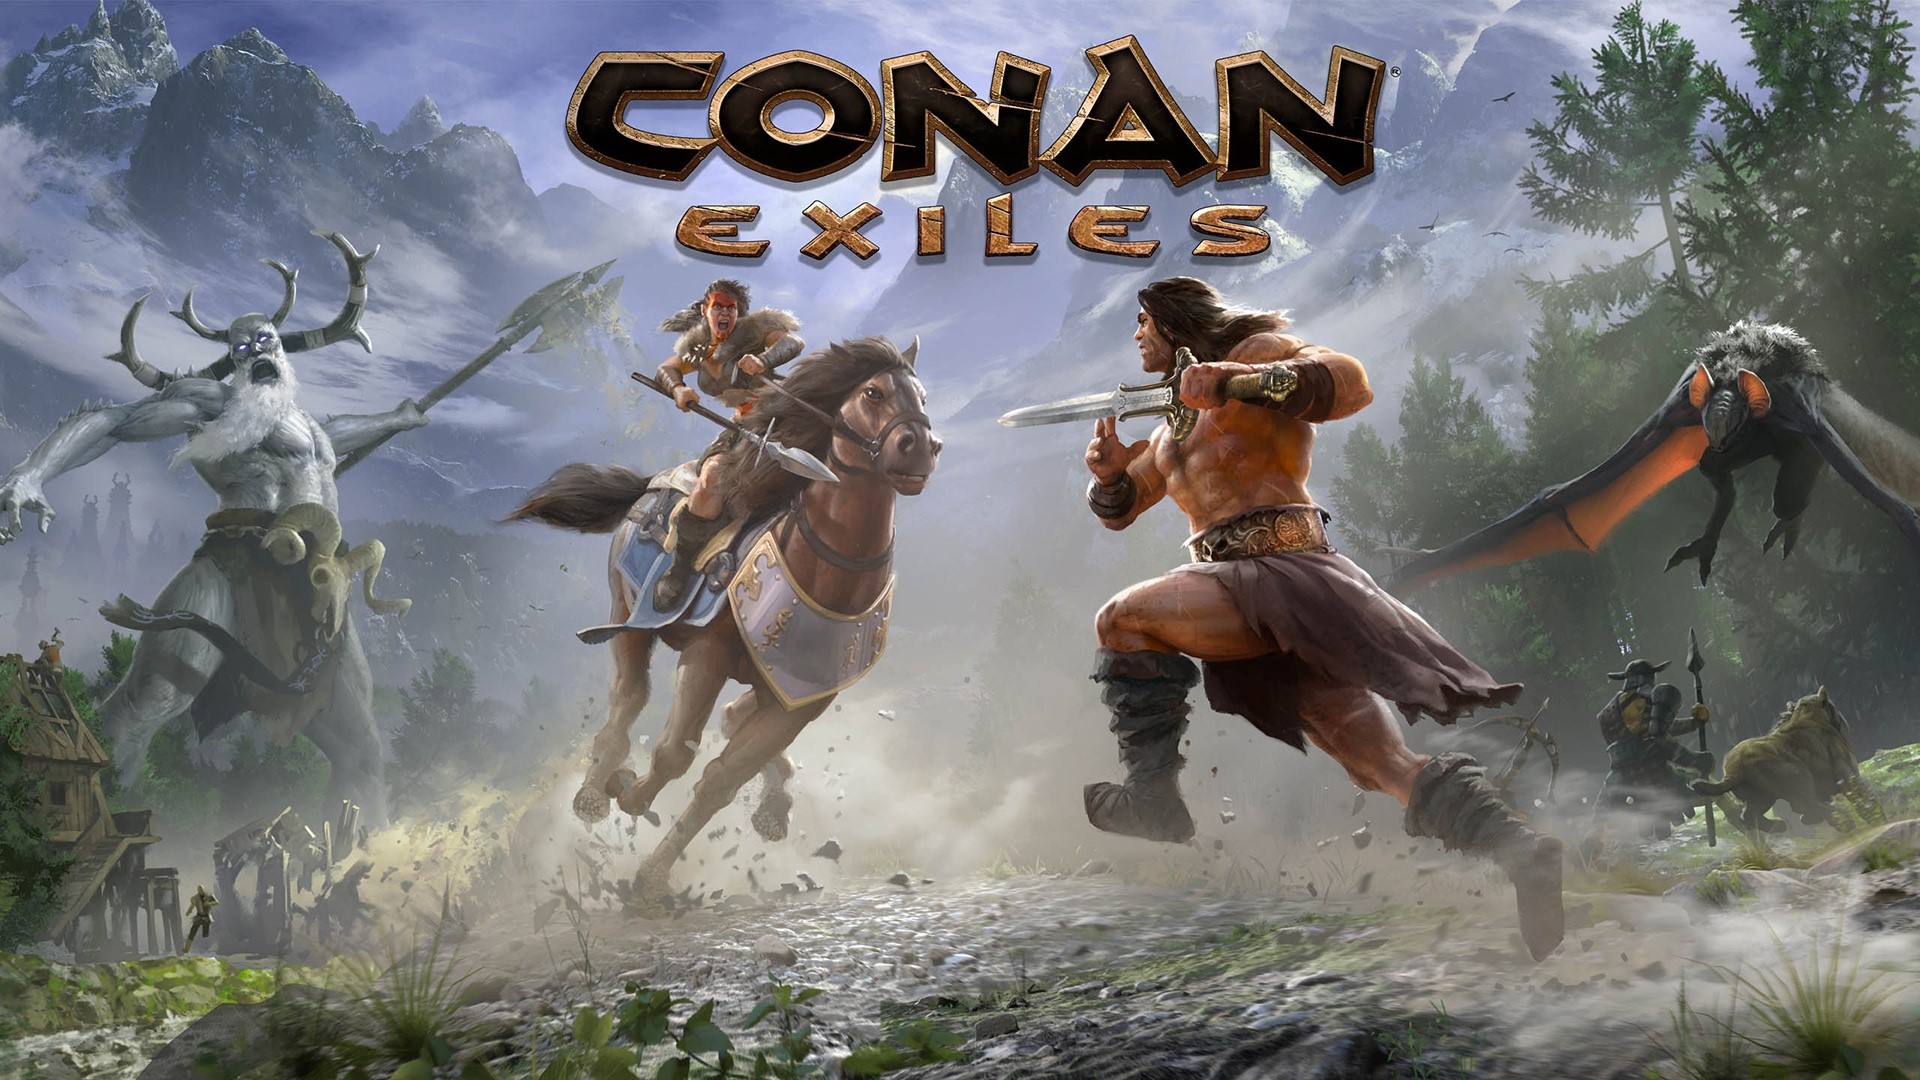 Conan Exiles / Online Steam / Full Access / Warranty / Inactive / Gift